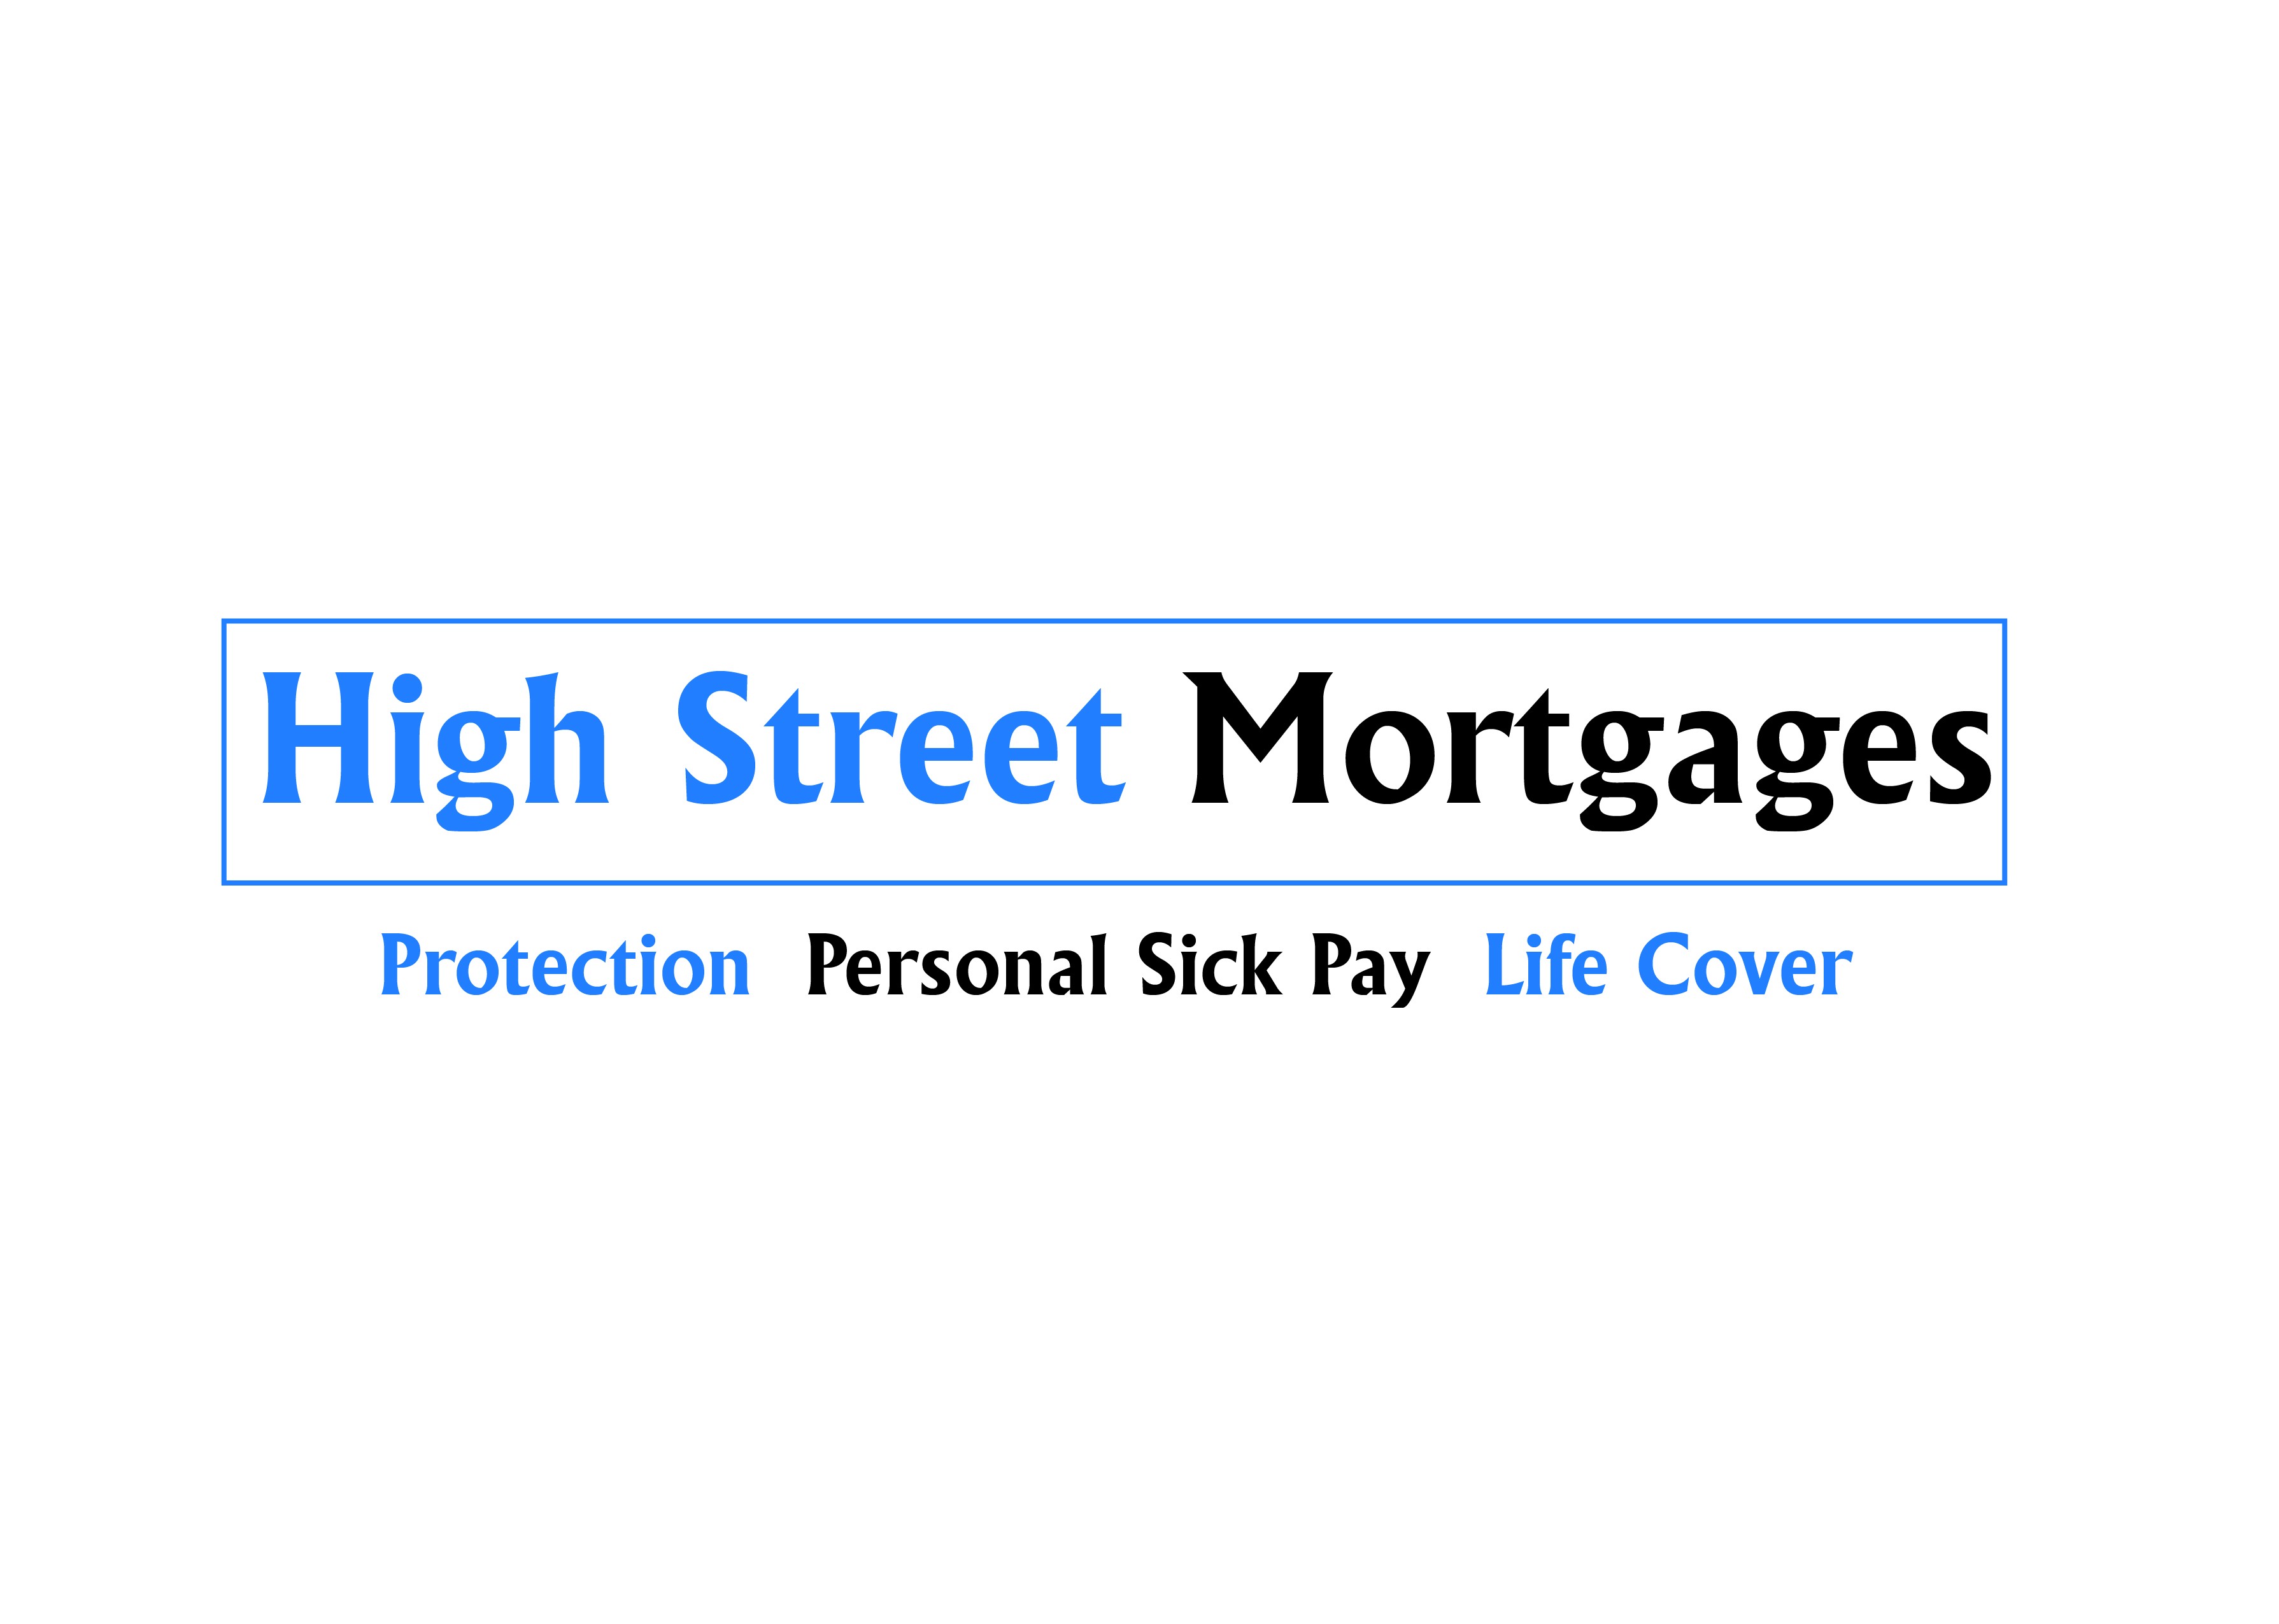 High Street Mortgages